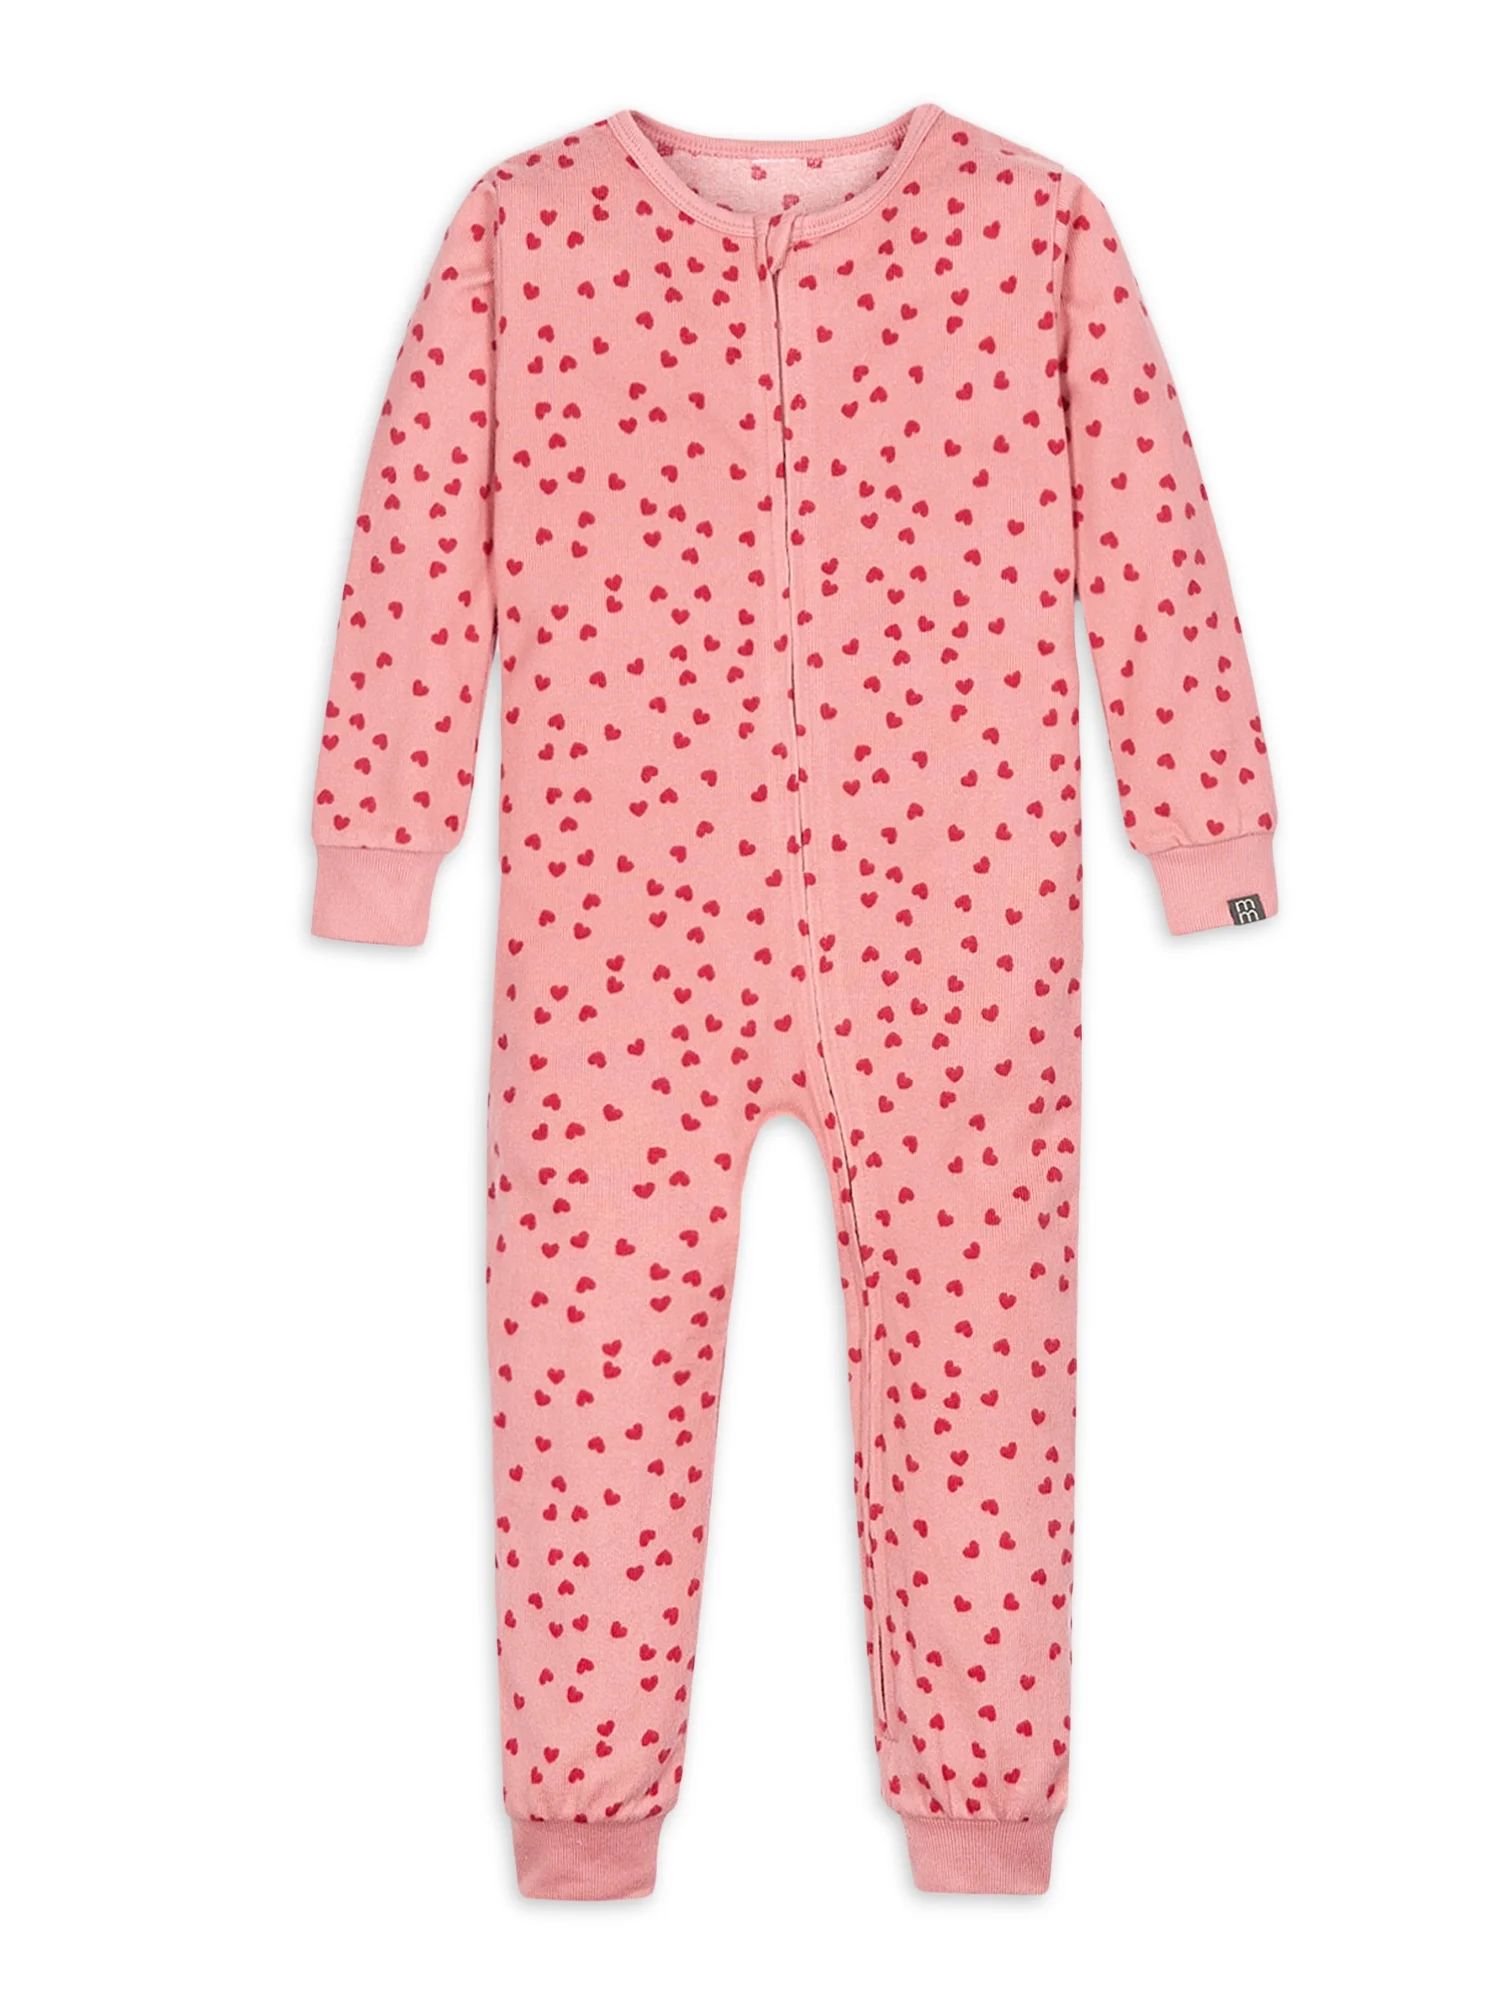 Modern Moments by Gerber Baby and Toddler Unisex Valentine's Day One-Piece Pajama, Sizes 12M-5T | Walmart (US)